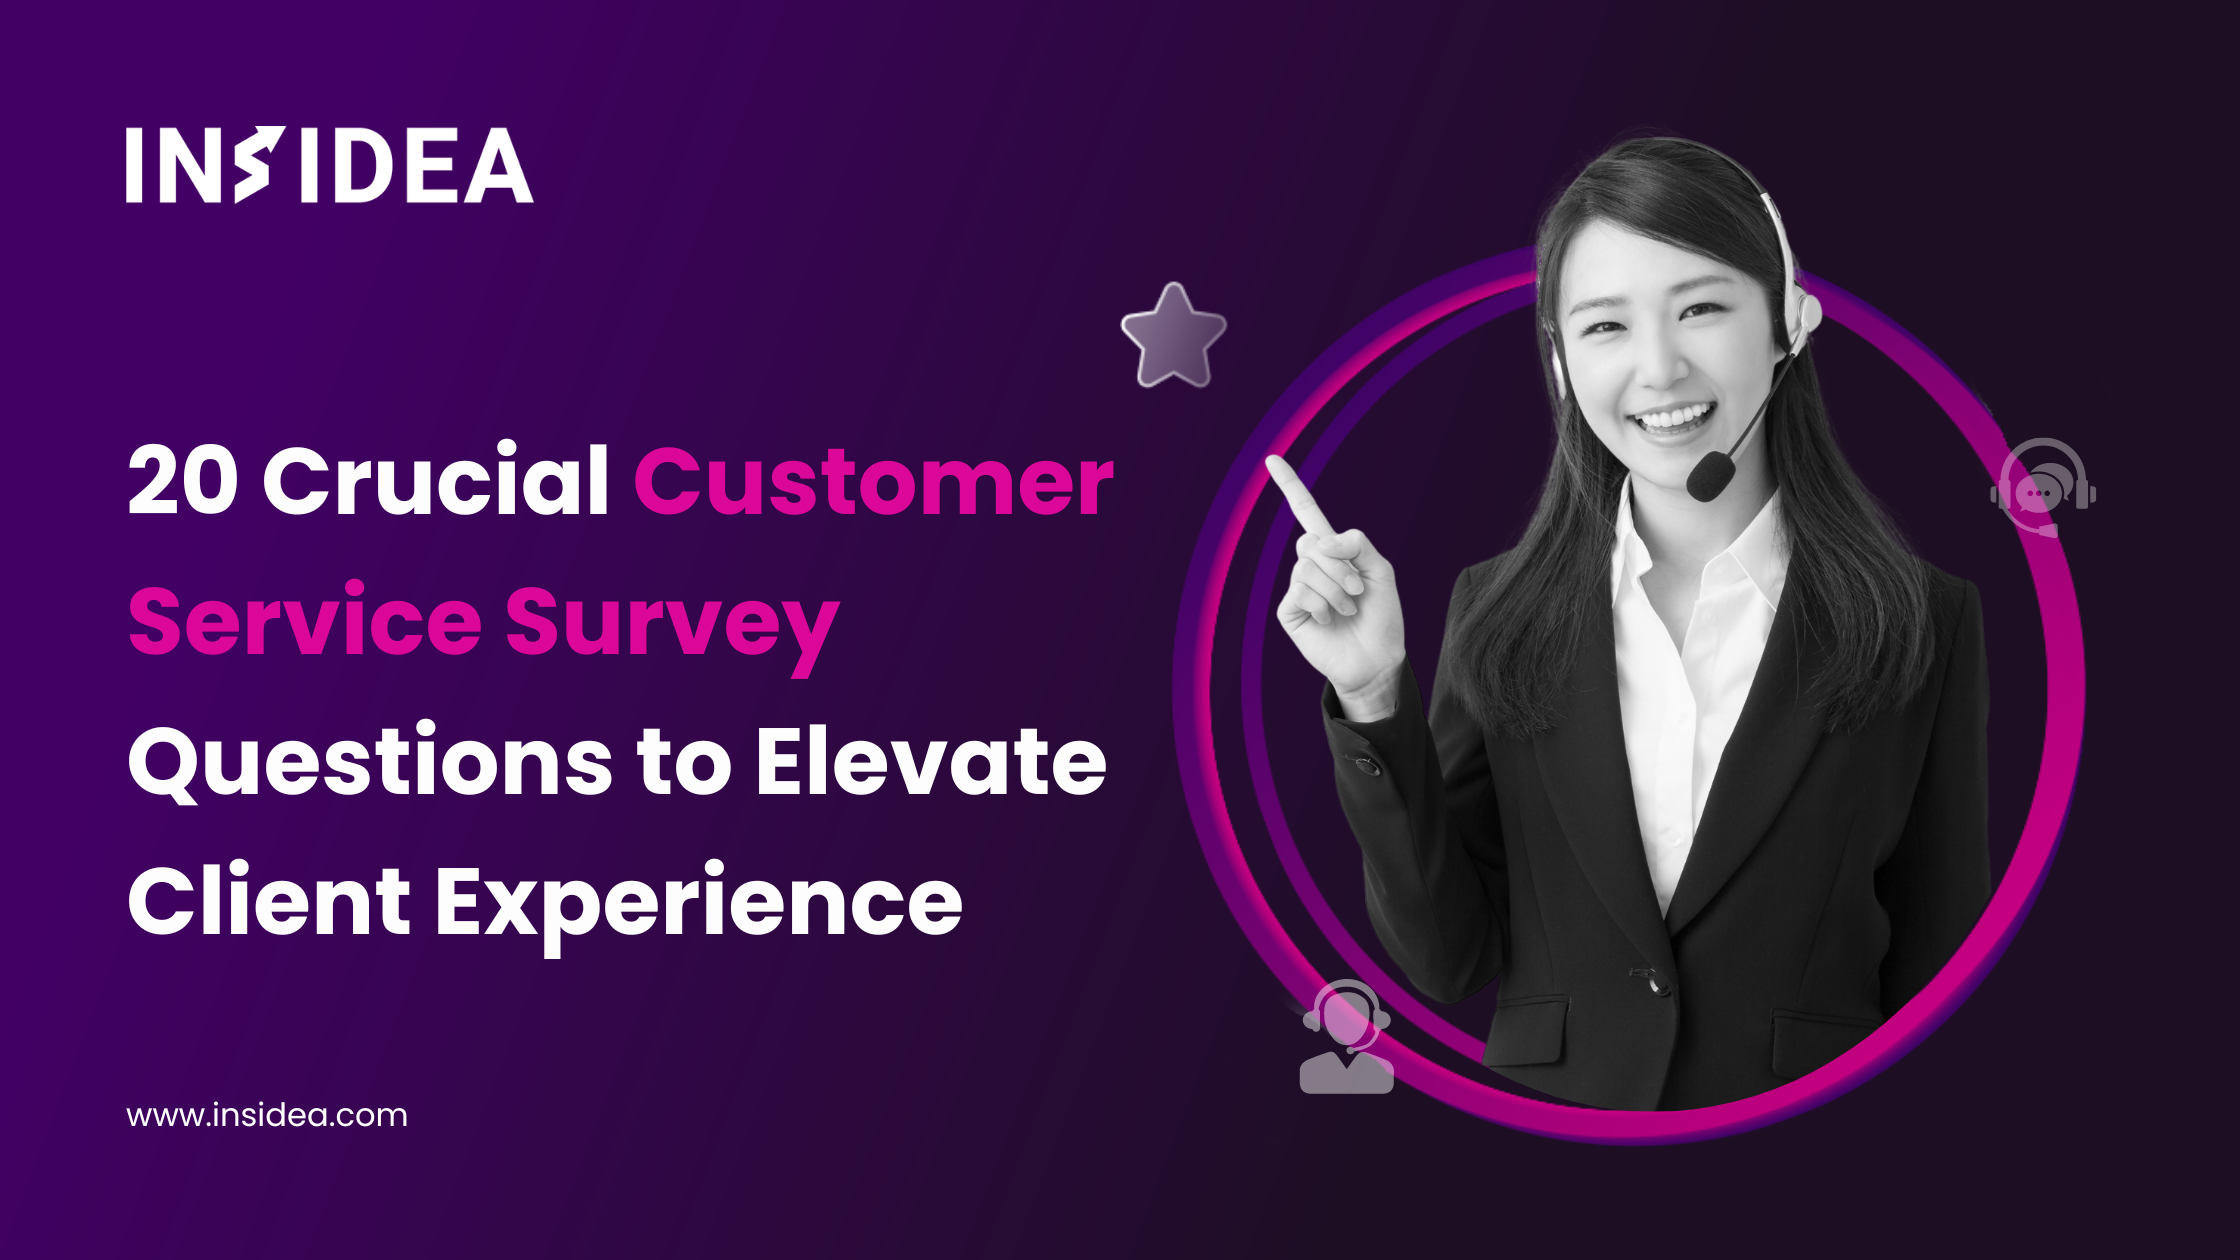 20 Crucial Customer Service Survey Questions to Elevate Client Experience